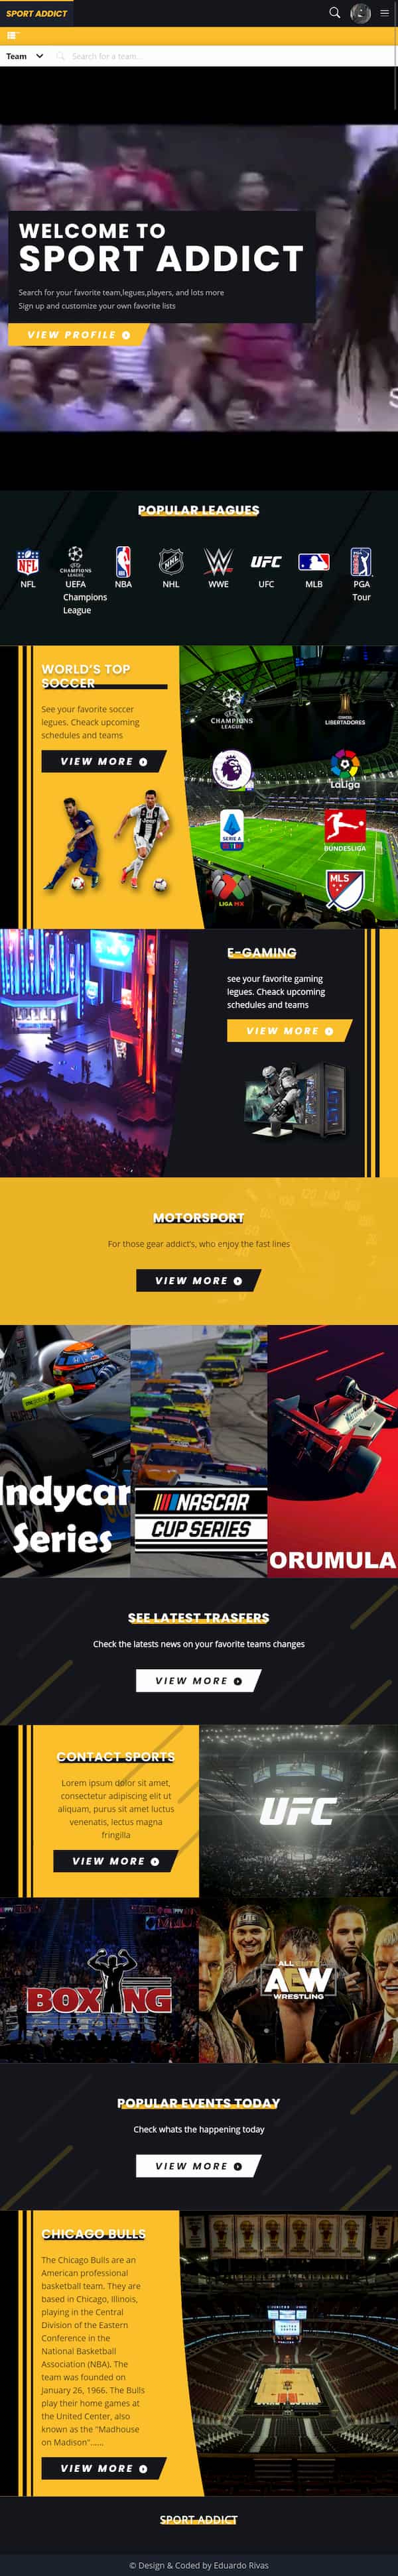 website page